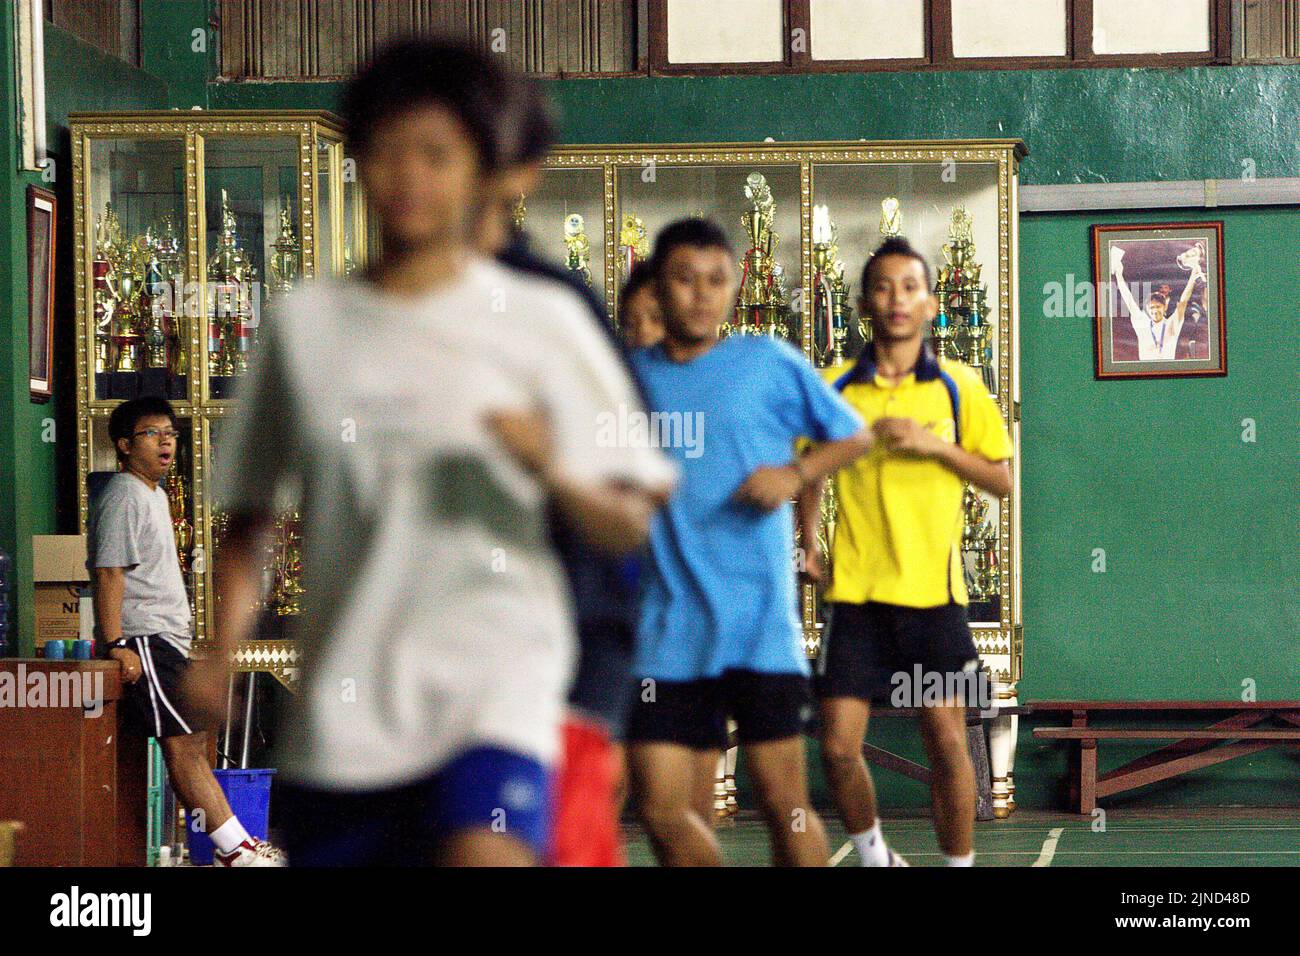 Young badminton players warming up during a training session at Jaya Raya badminton club in Jakarta, Indonesia, photographed in a background of a trophy cabinet and a picture of the club's former star player, Olympic gold medalist Susi Susanti. Stock Photo